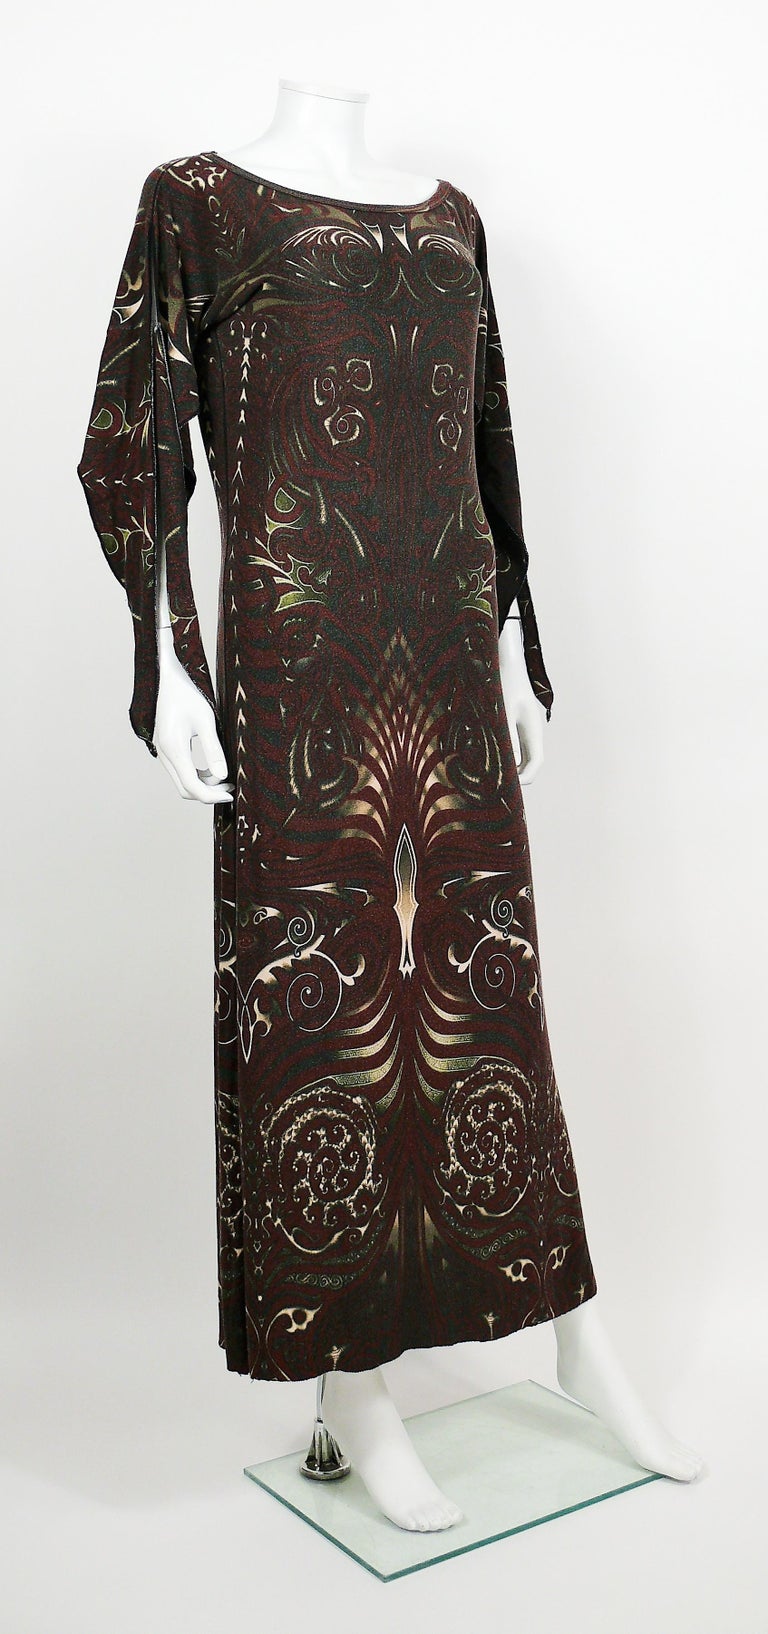 JEAN PAUL GAULTIER vintage maxi dress featuring an opulent Aboriginal Maori tattoo print, deep round neckline and open sleeves.

Stretchy material.

Label reads GAULTIER JEAN'S.
Made in Romania.

Missing size and composition tag.
Please refer to